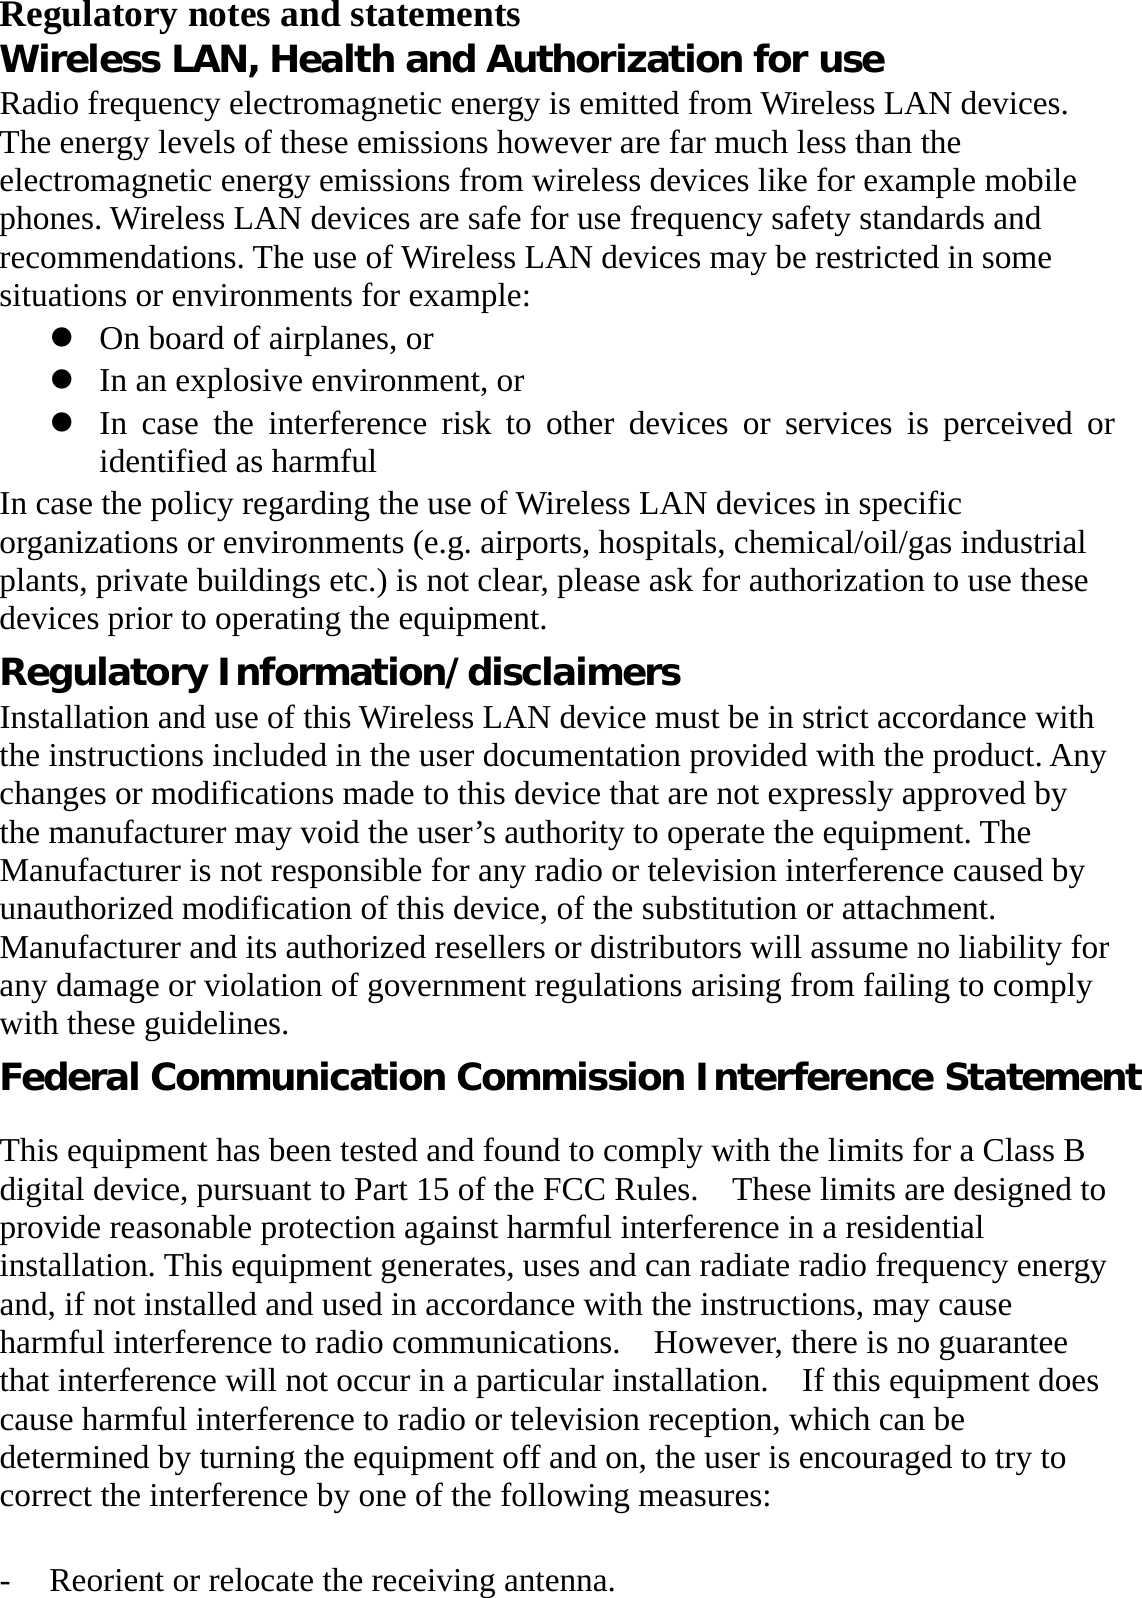 Regulatory notes and statements Wireless LAN, Health and Authorization for use Radio frequency electromagnetic energy is emitted from Wireless LAN devices. The energy levels of these emissions however are far much less than the electromagnetic energy emissions from wireless devices like for example mobile phones. Wireless LAN devices are safe for use frequency safety standards and recommendations. The use of Wireless LAN devices may be restricted in some situations or environments for example: z On board of airplanes, or z In an explosive environment, or z In case the interference risk to other devices or services is perceived or identified as harmful In case the policy regarding the use of Wireless LAN devices in specific organizations or environments (e.g. airports, hospitals, chemical/oil/gas industrial plants, private buildings etc.) is not clear, please ask for authorization to use these devices prior to operating the equipment. Regulatory Information/disclaimers Installation and use of this Wireless LAN device must be in strict accordance with the instructions included in the user documentation provided with the product. Any changes or modifications made to this device that are not expressly approved by the manufacturer may void the user’s authority to operate the equipment. The Manufacturer is not responsible for any radio or television interference caused by unauthorized modification of this device, of the substitution or attachment. Manufacturer and its authorized resellers or distributors will assume no liability for any damage or violation of government regulations arising from failing to comply with these guidelines. Federal Communication Commission Interference Statement  This equipment has been tested and found to comply with the limits for a Class B digital device, pursuant to Part 15 of the FCC Rules.    These limits are designed to provide reasonable protection against harmful interference in a residential installation. This equipment generates, uses and can radiate radio frequency energy and, if not installed and used in accordance with the instructions, may cause harmful interference to radio communications.    However, there is no guarantee that interference will not occur in a particular installation.    If this equipment does cause harmful interference to radio or television reception, which can be determined by turning the equipment off and on, the user is encouraged to try to correct the interference by one of the following measures:  - Reorient or relocate the receiving antenna. 